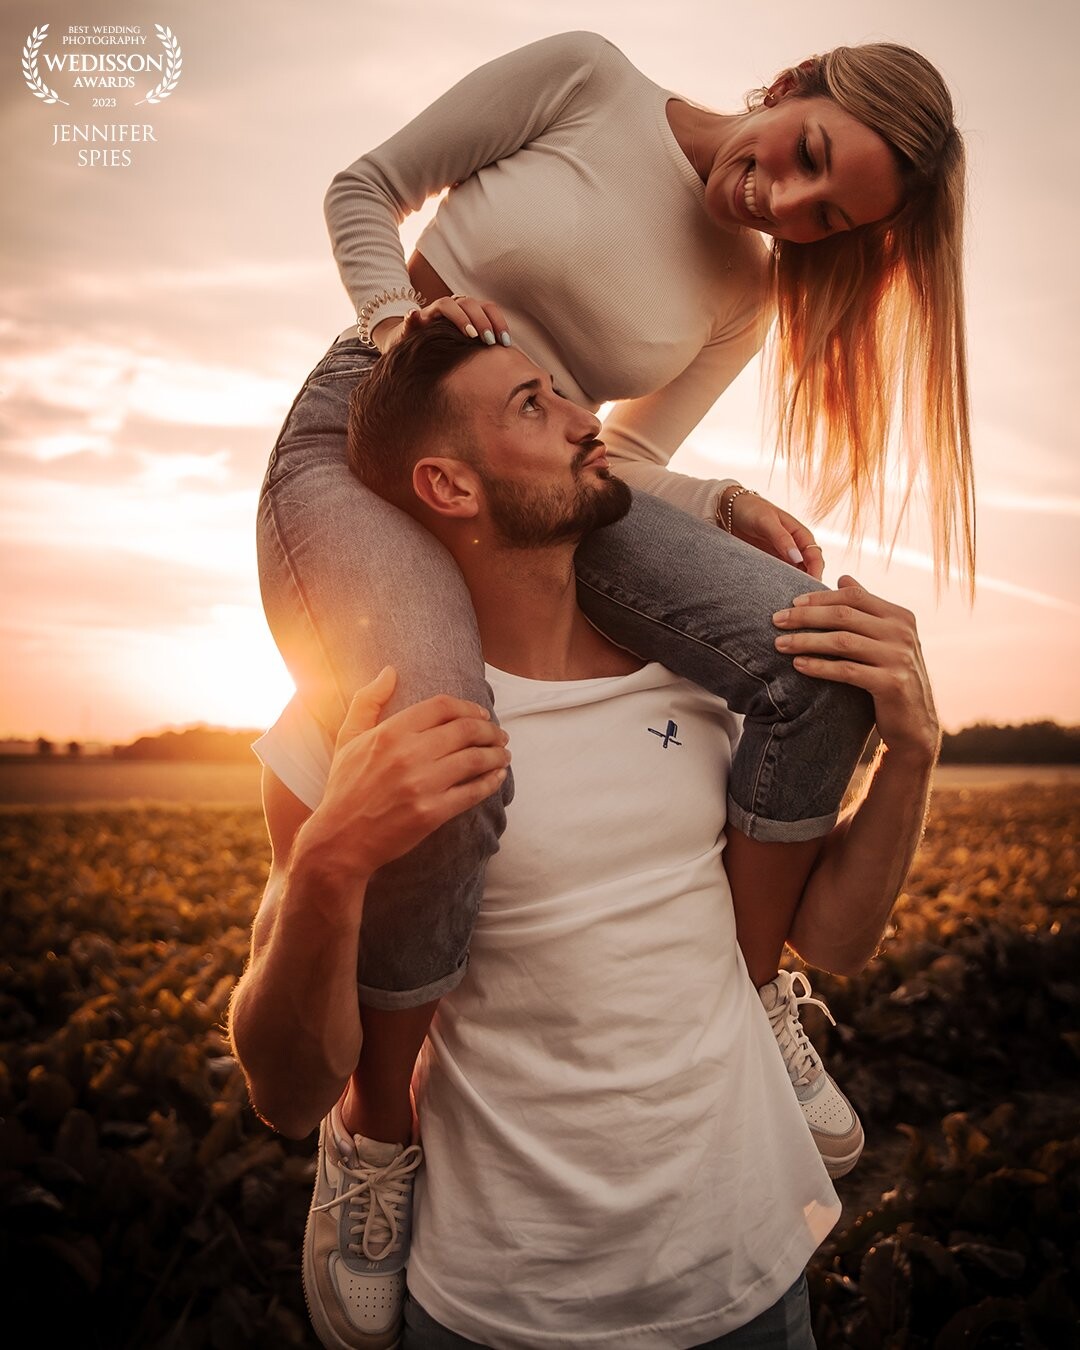 What a great shooting during the golden hour with perfect light. What could be nicer than being in love and capturing this feeling in the form of pictures.